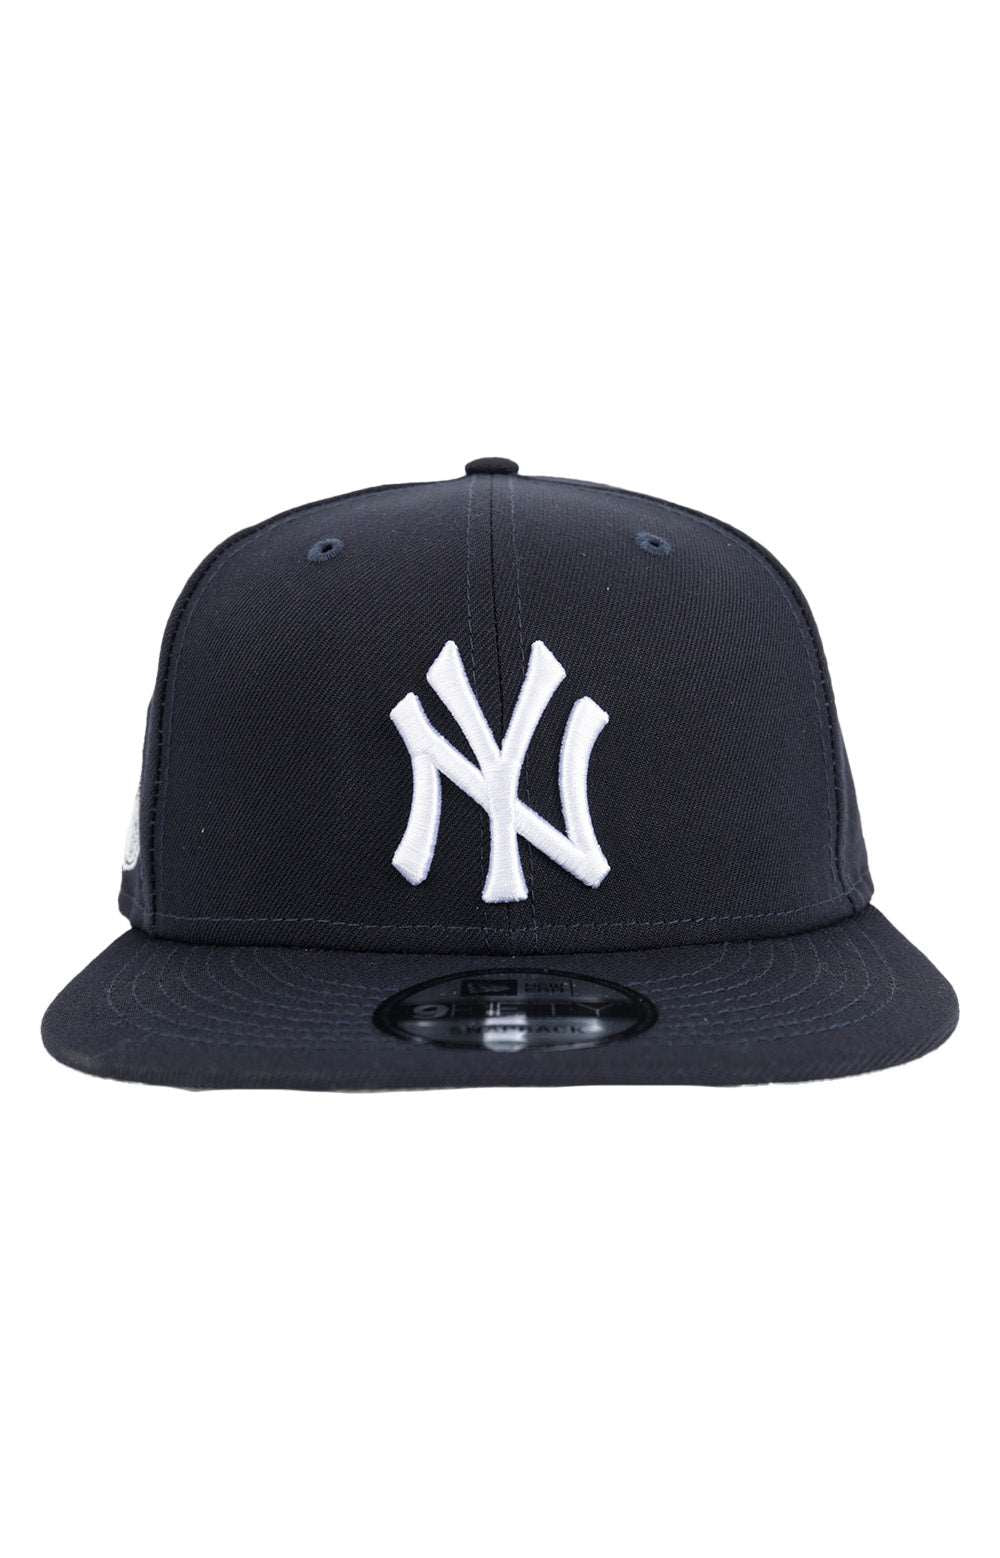 NY Yankees 08 ASG Side Patch 9Fifty Snap-Back Hat